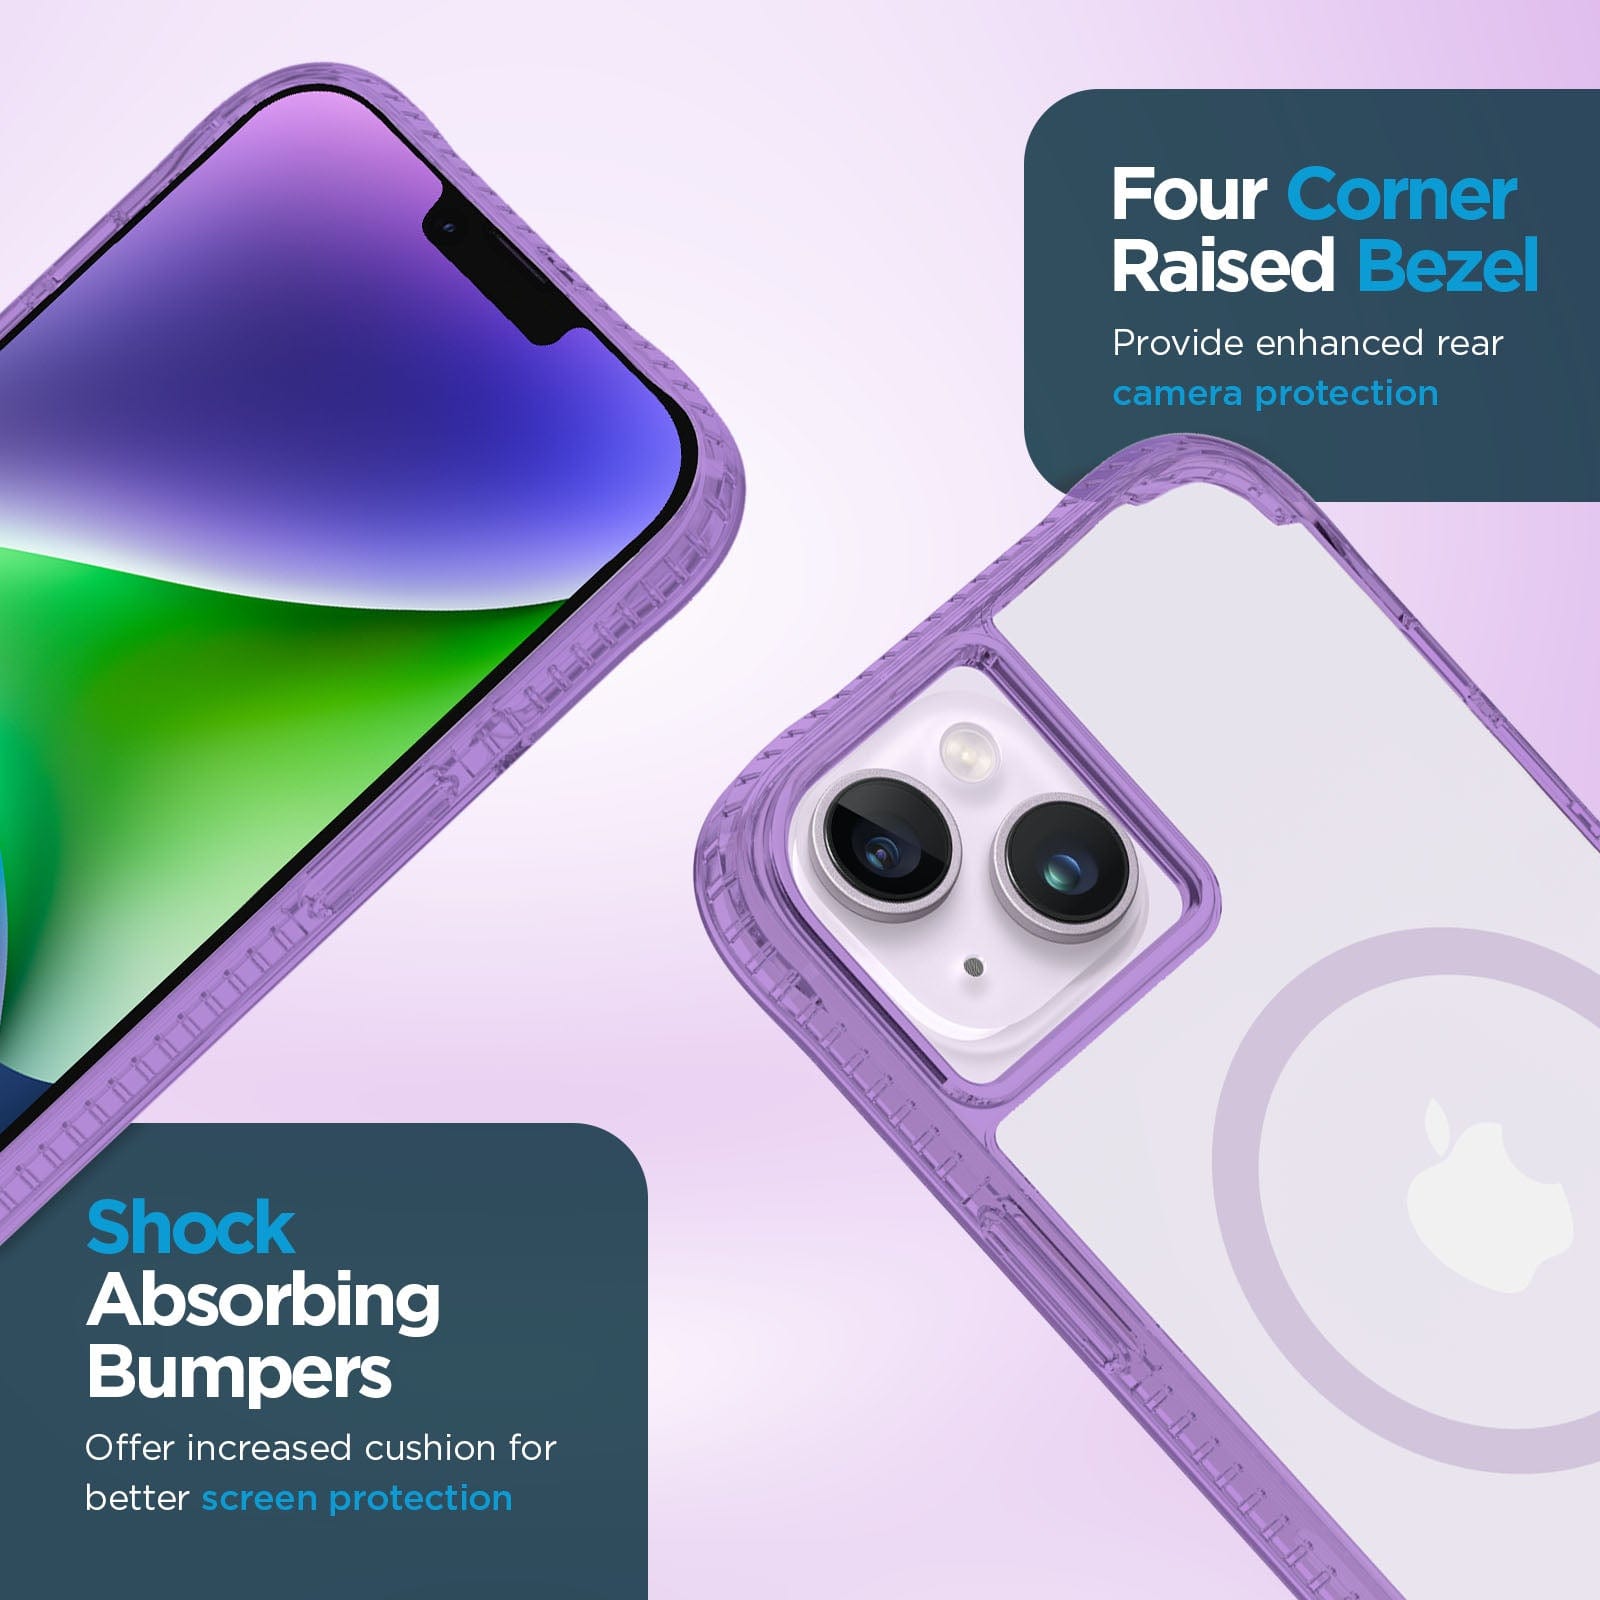 Four corner raised bezel. Provide enhanced rear camera protection. shock absorbing bumpers offer increased cushion for better screen protection.